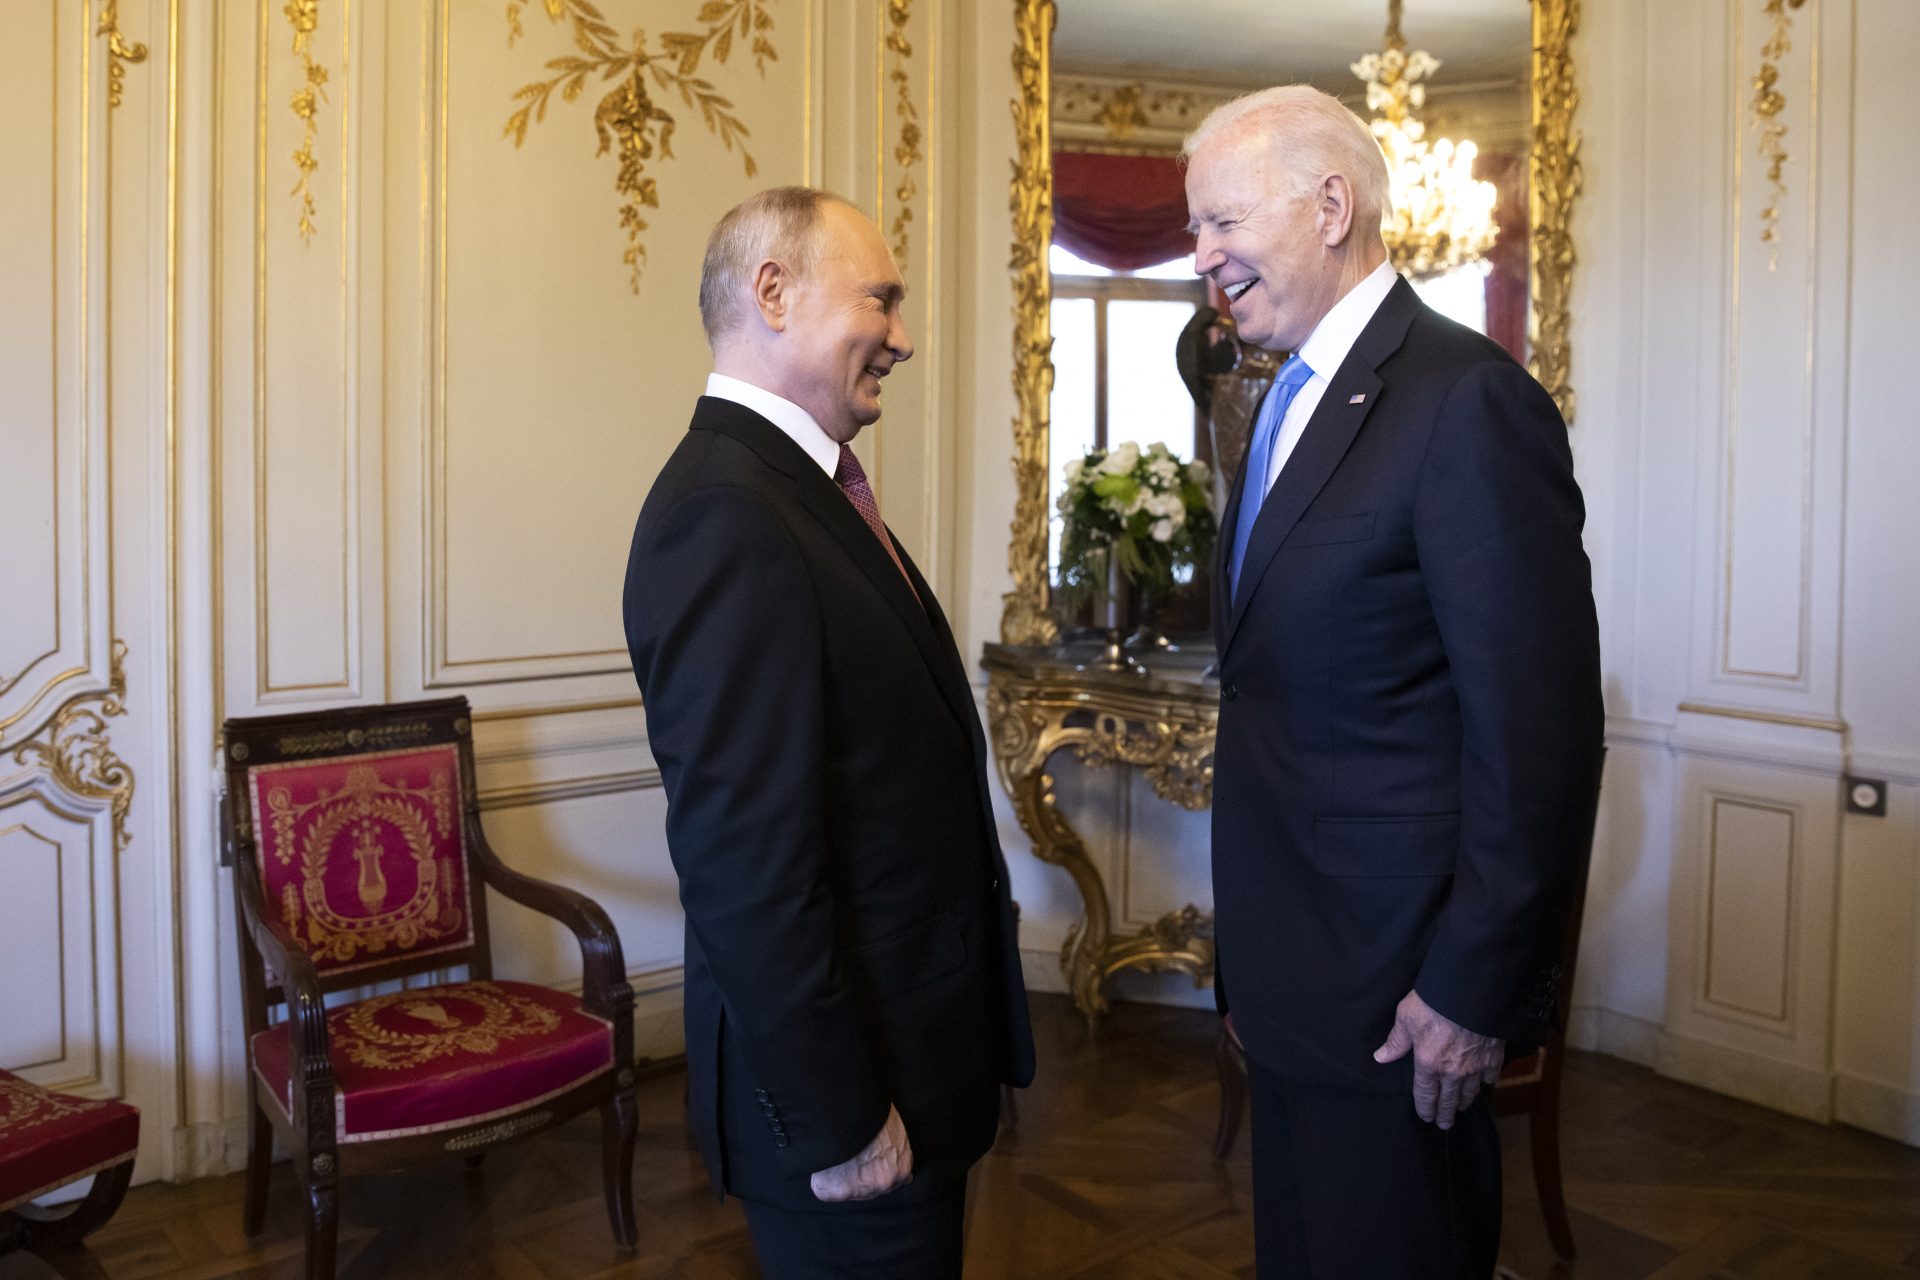 Trump says if Biden stays in power Putin will get what he wants